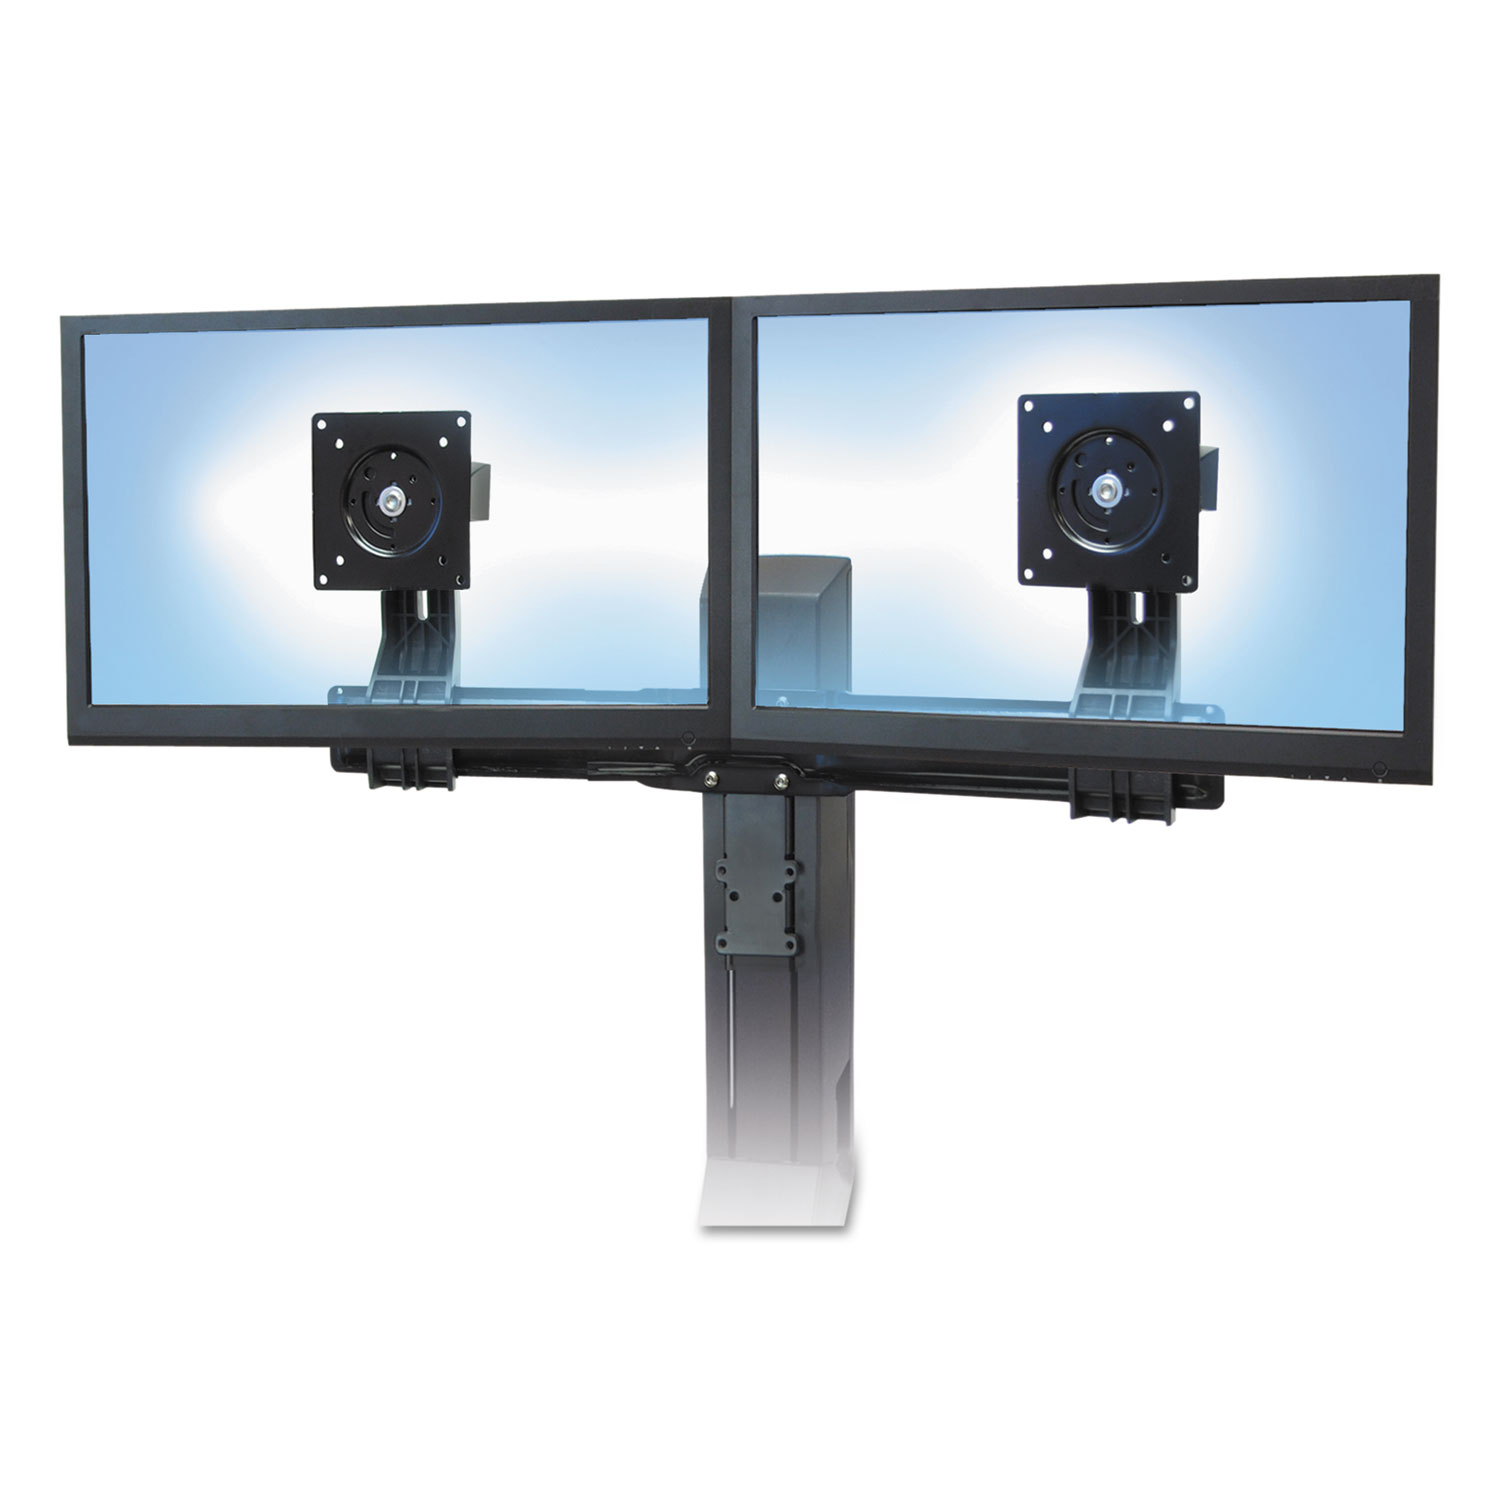  WorkFit by Ergotron 97-615 Tall-User Kit for WorkFit-A/S/C Dual Display Workstations, Black (ERG97615) 